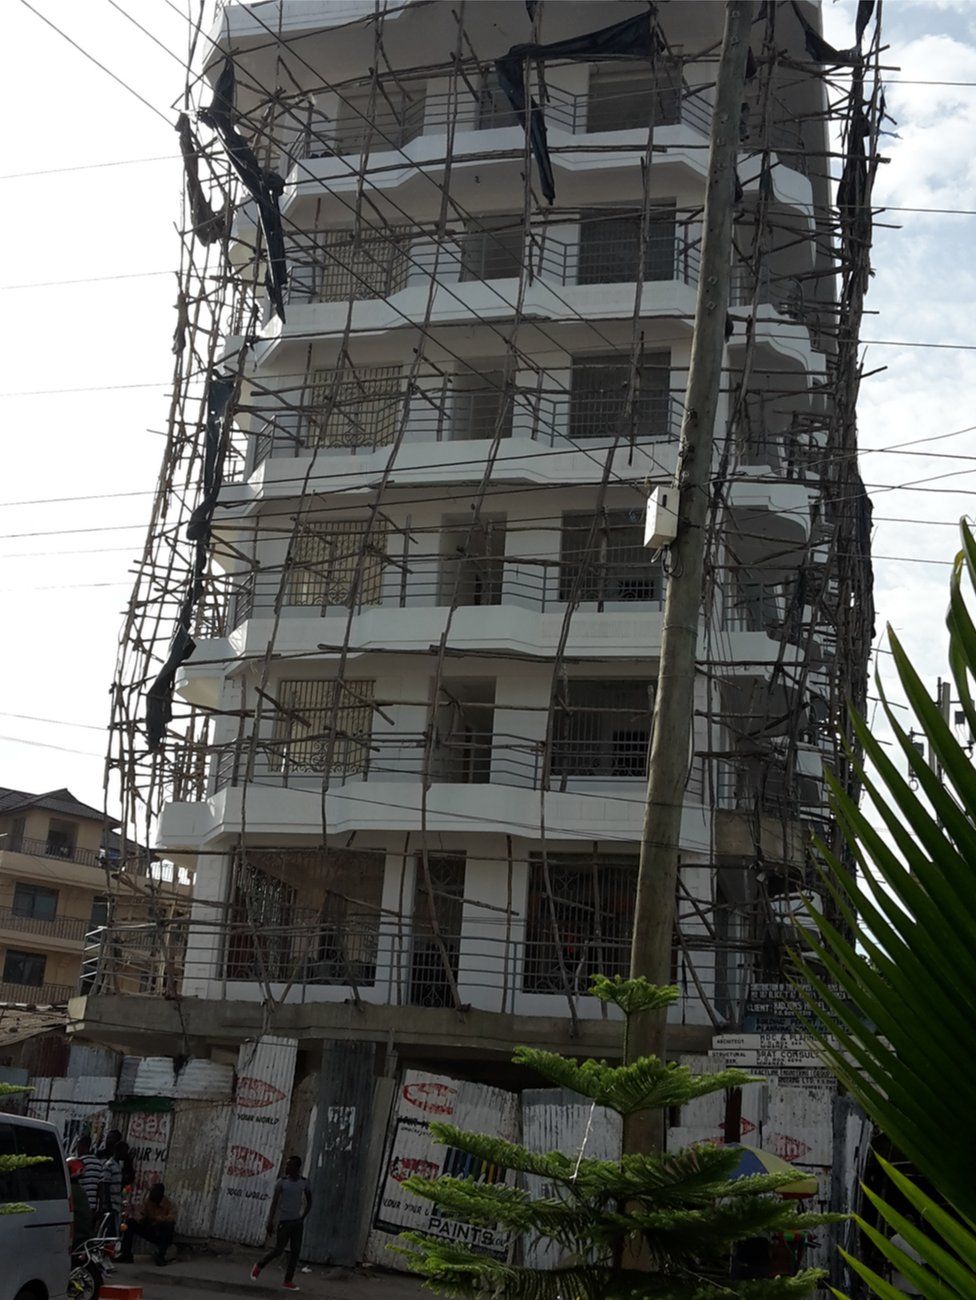 Wooden scaffolding on a seven story building in Mwanza, Tanzania, January 2016